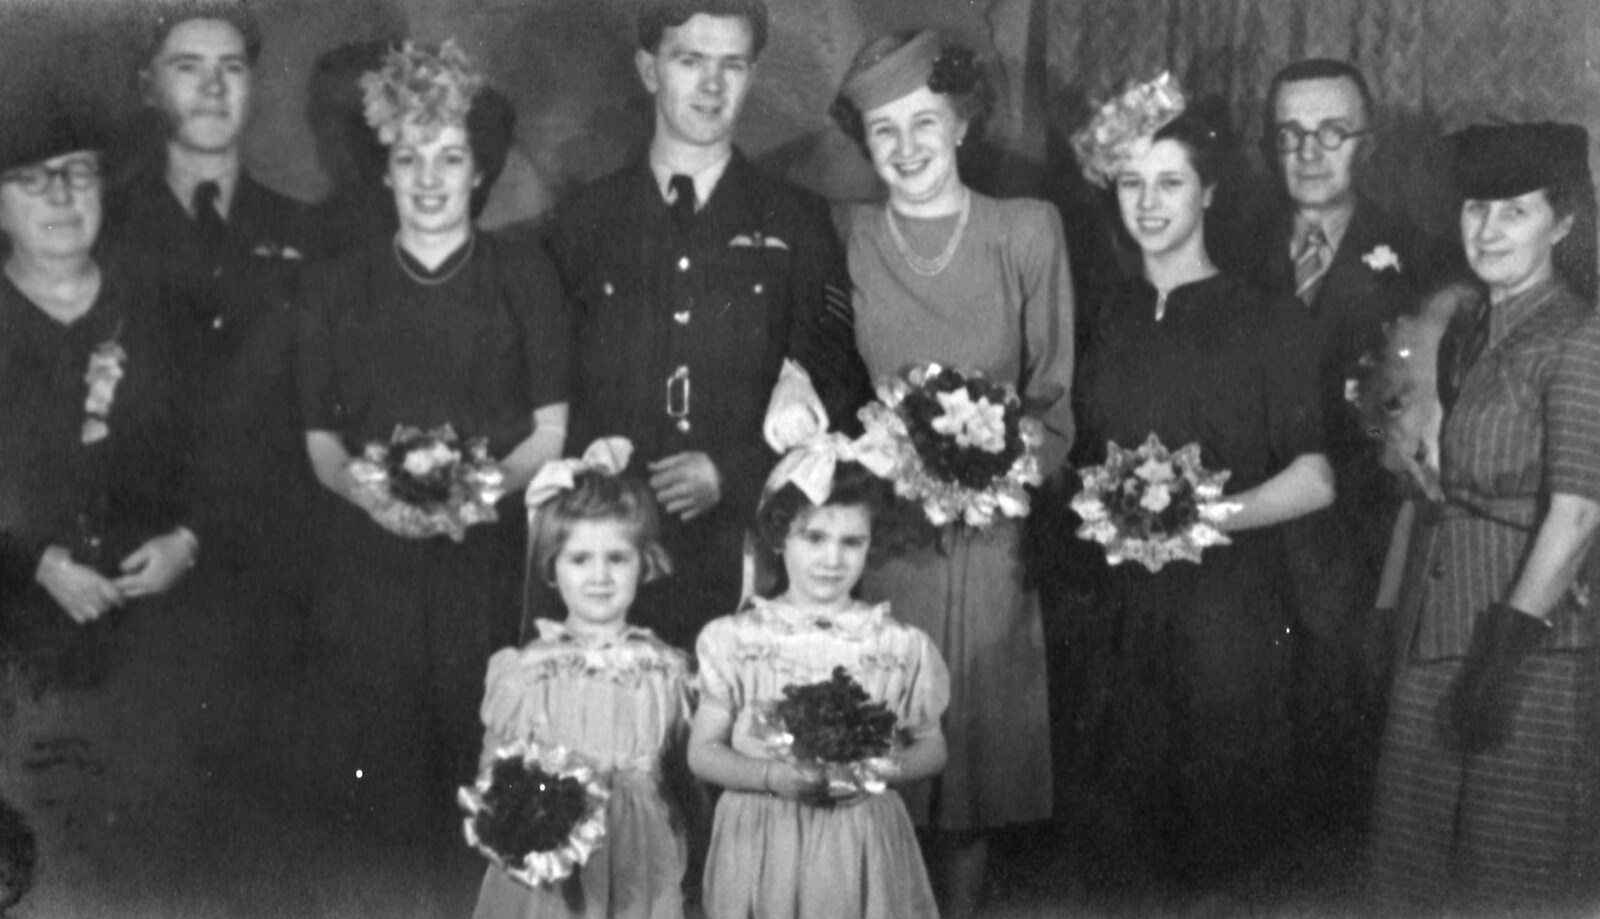 Joseph and Margaret's wedding, 1946 from Family History: The 1940s and 1950s - 24th January 2020